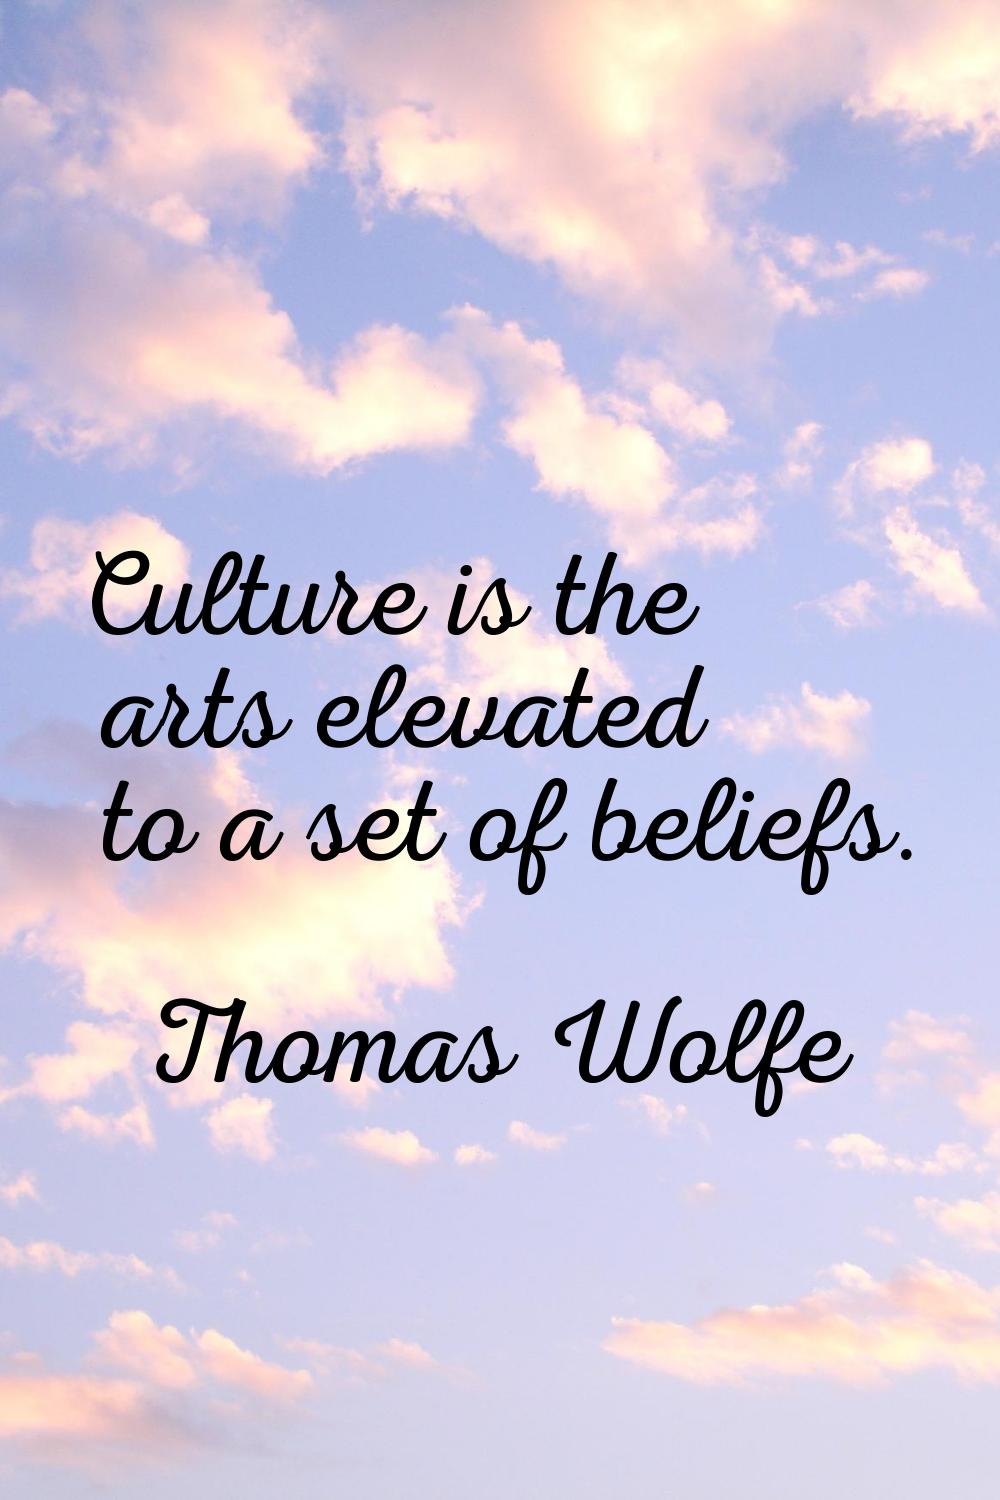 Culture is the arts elevated to a set of beliefs.